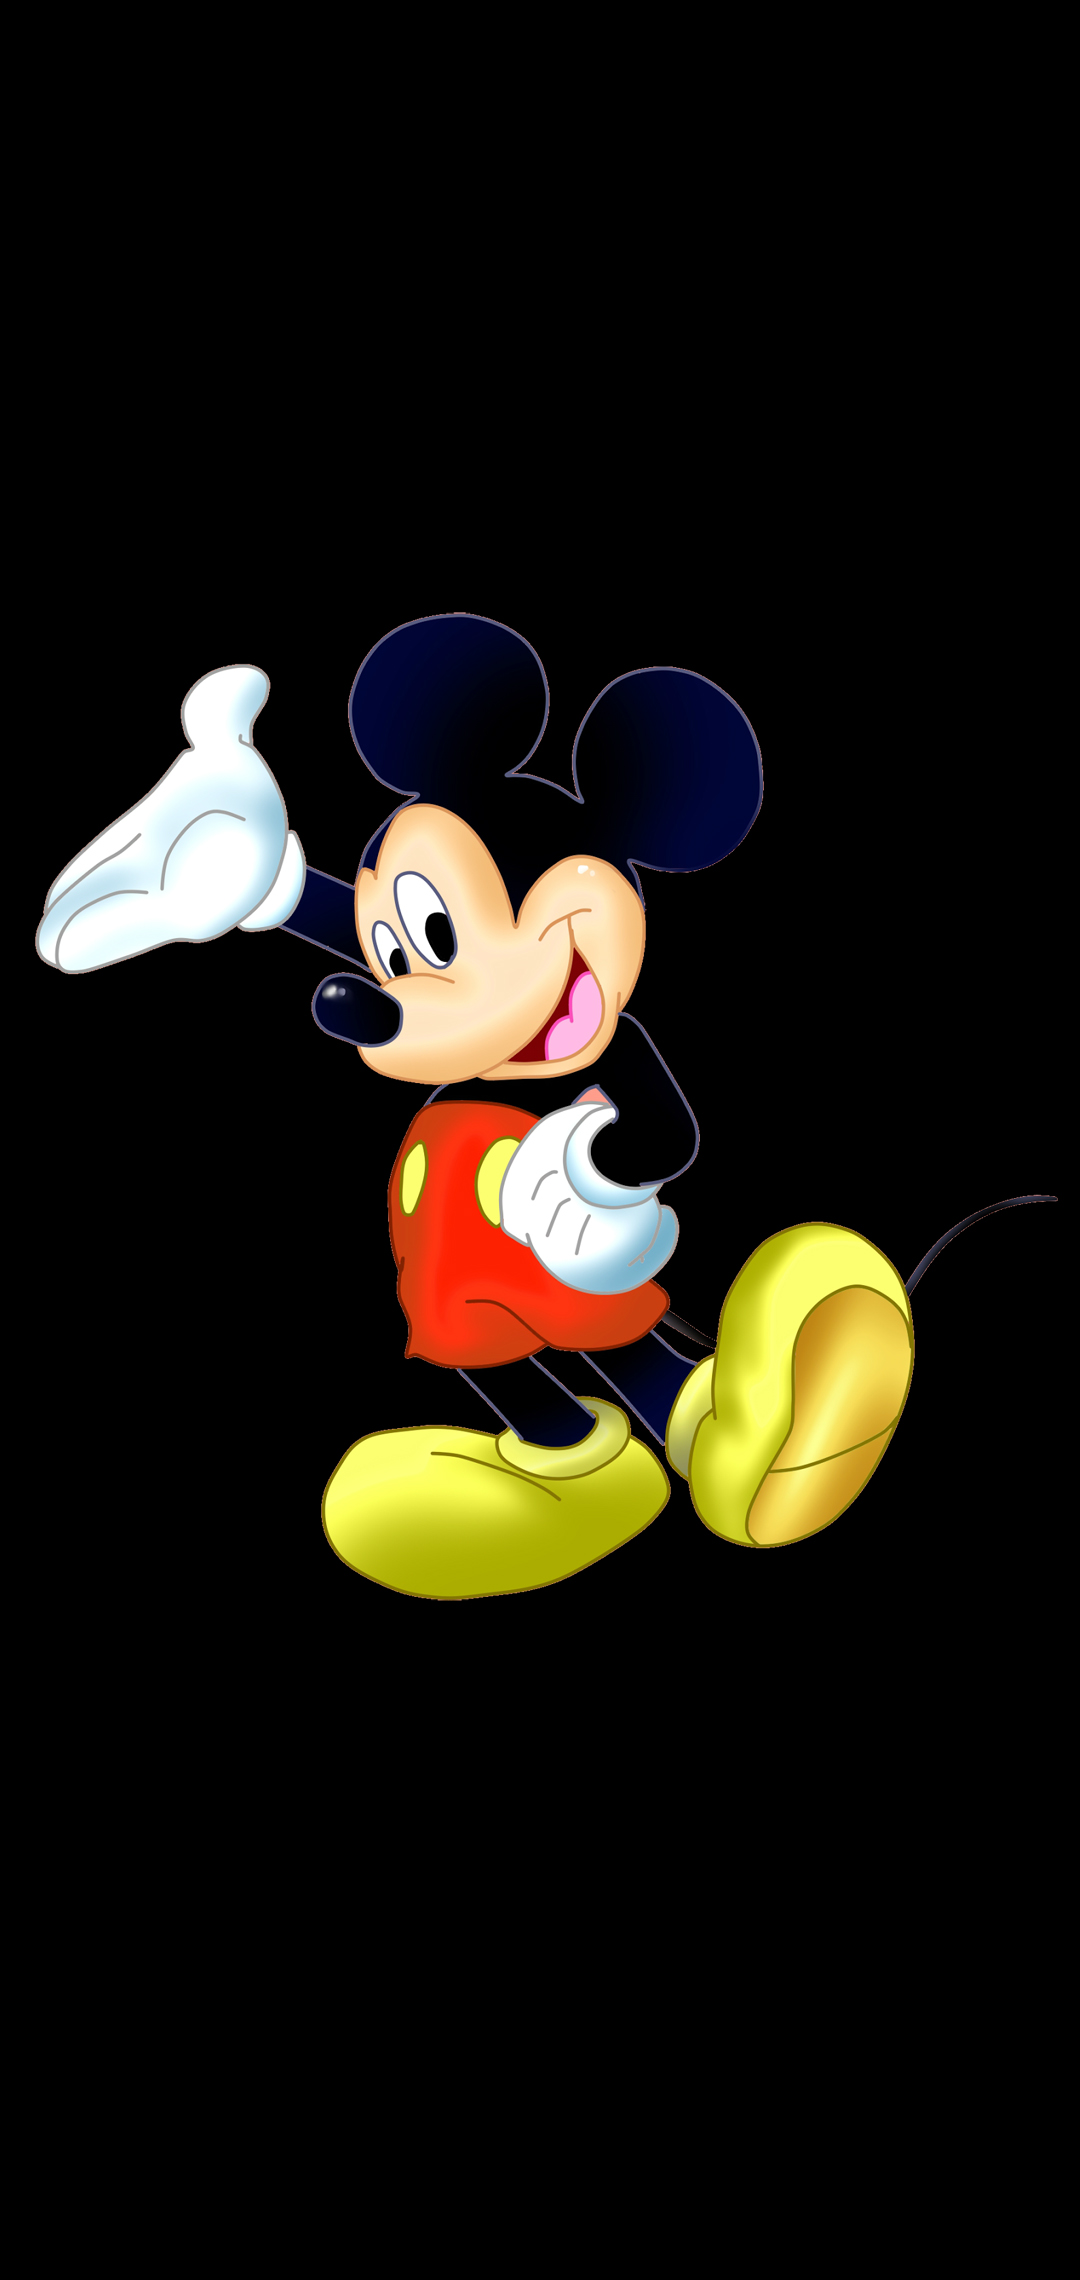 Mickey Mouse Wallpaper - Galaxy Note 10 Wallpaper Hole Punch , HD Wallpaper & Backgrounds